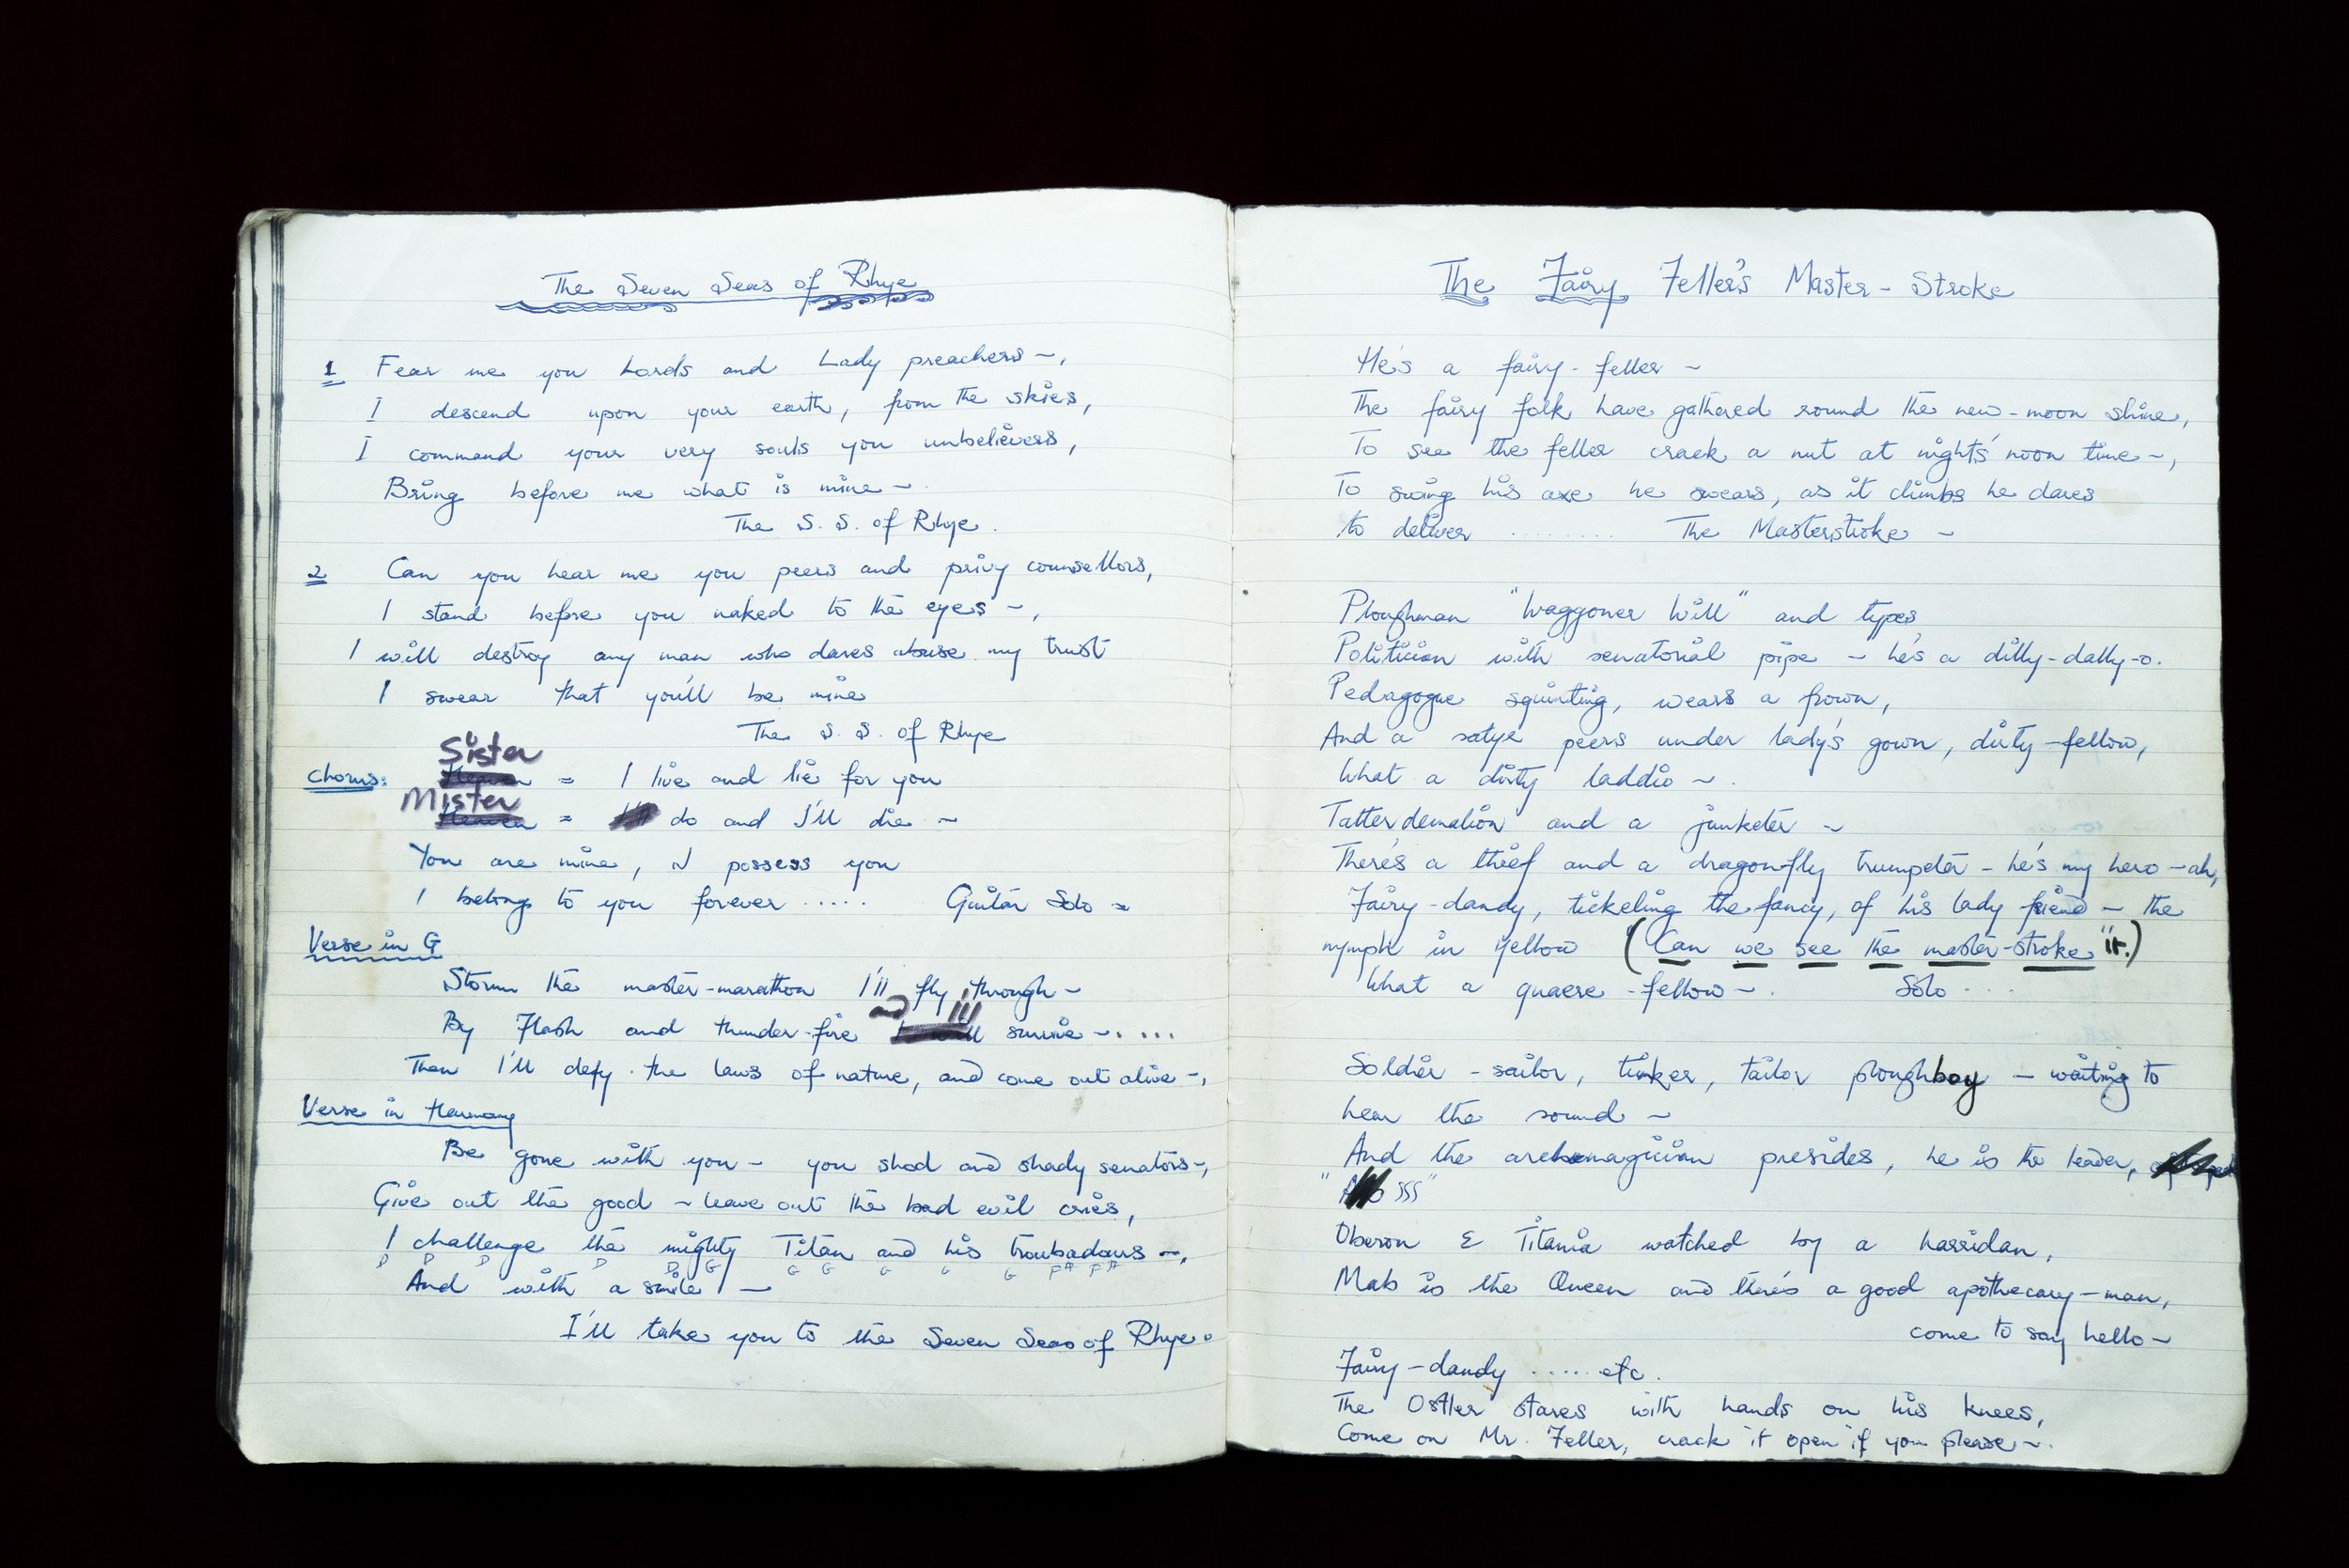   Freddie Mercury’s handwritten lyrics from the 1970’s, inside a red notebook which is believed to be one of his most prized possessions.   